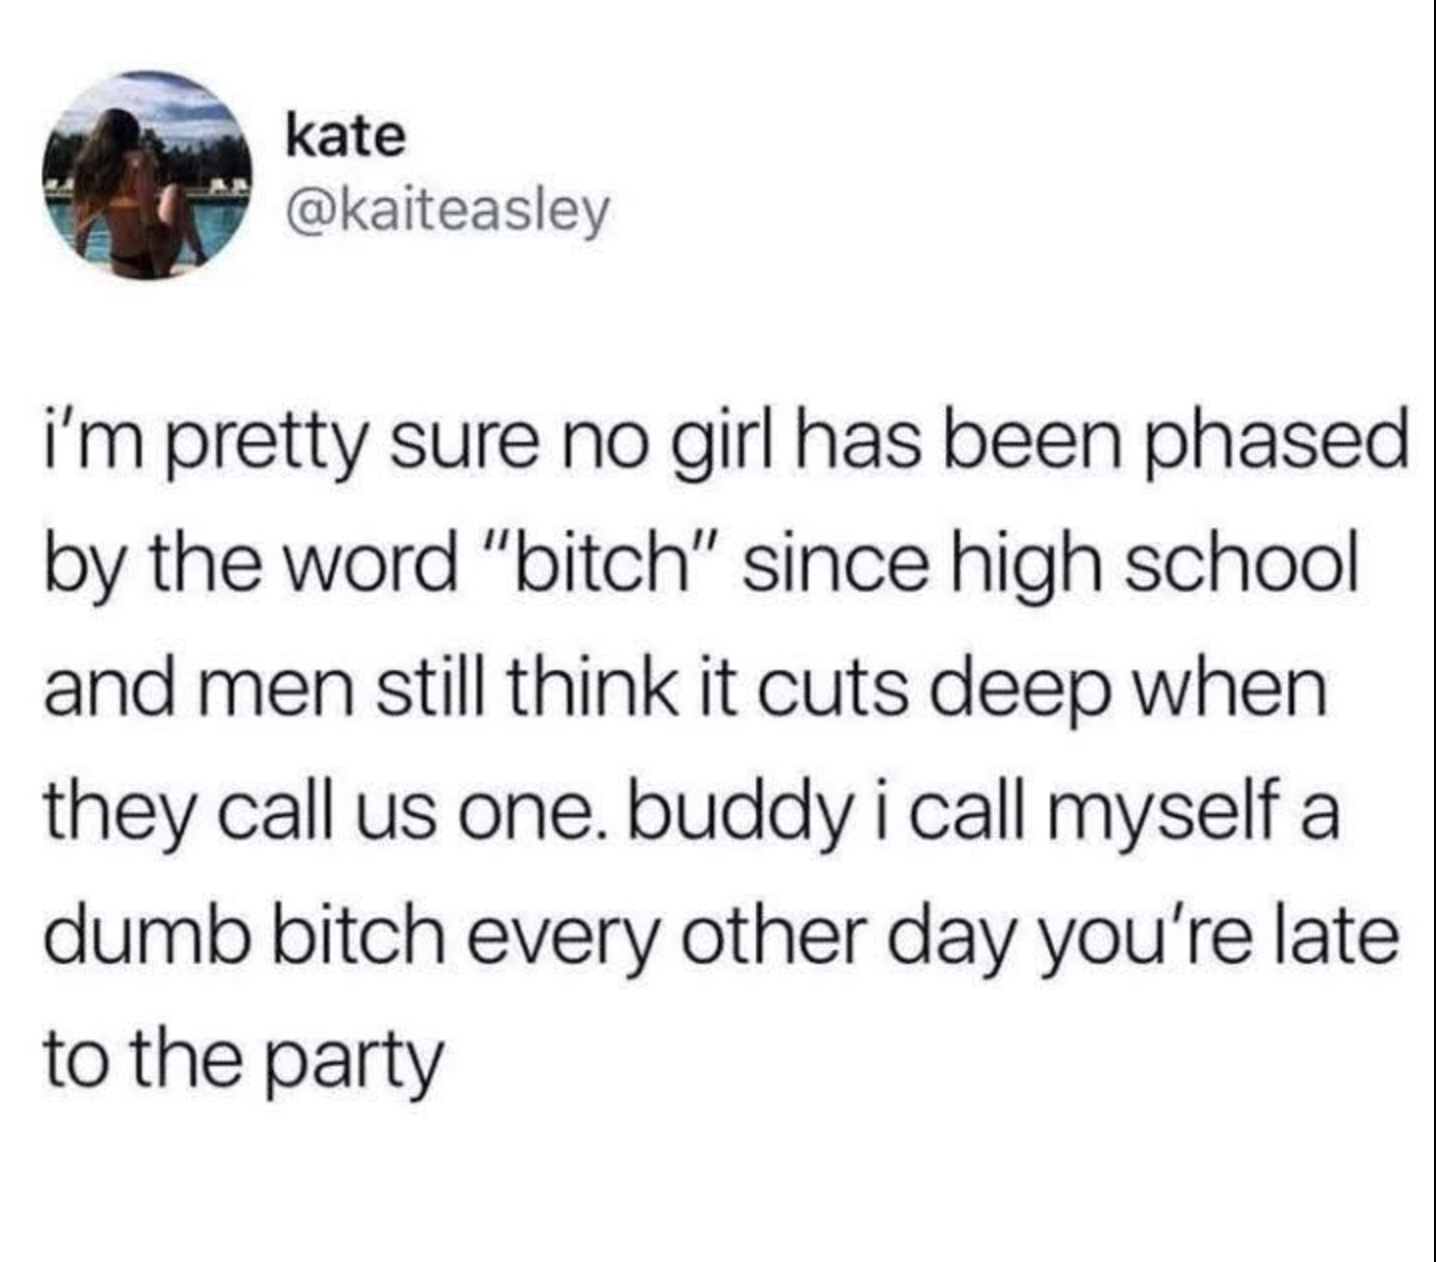 document - kate i'm pretty sure no girl has been phased by the word "bitch" since high school and men still think it cuts deep when they call us one. buddy i call myself a dumb bitch every other day you're late to the party